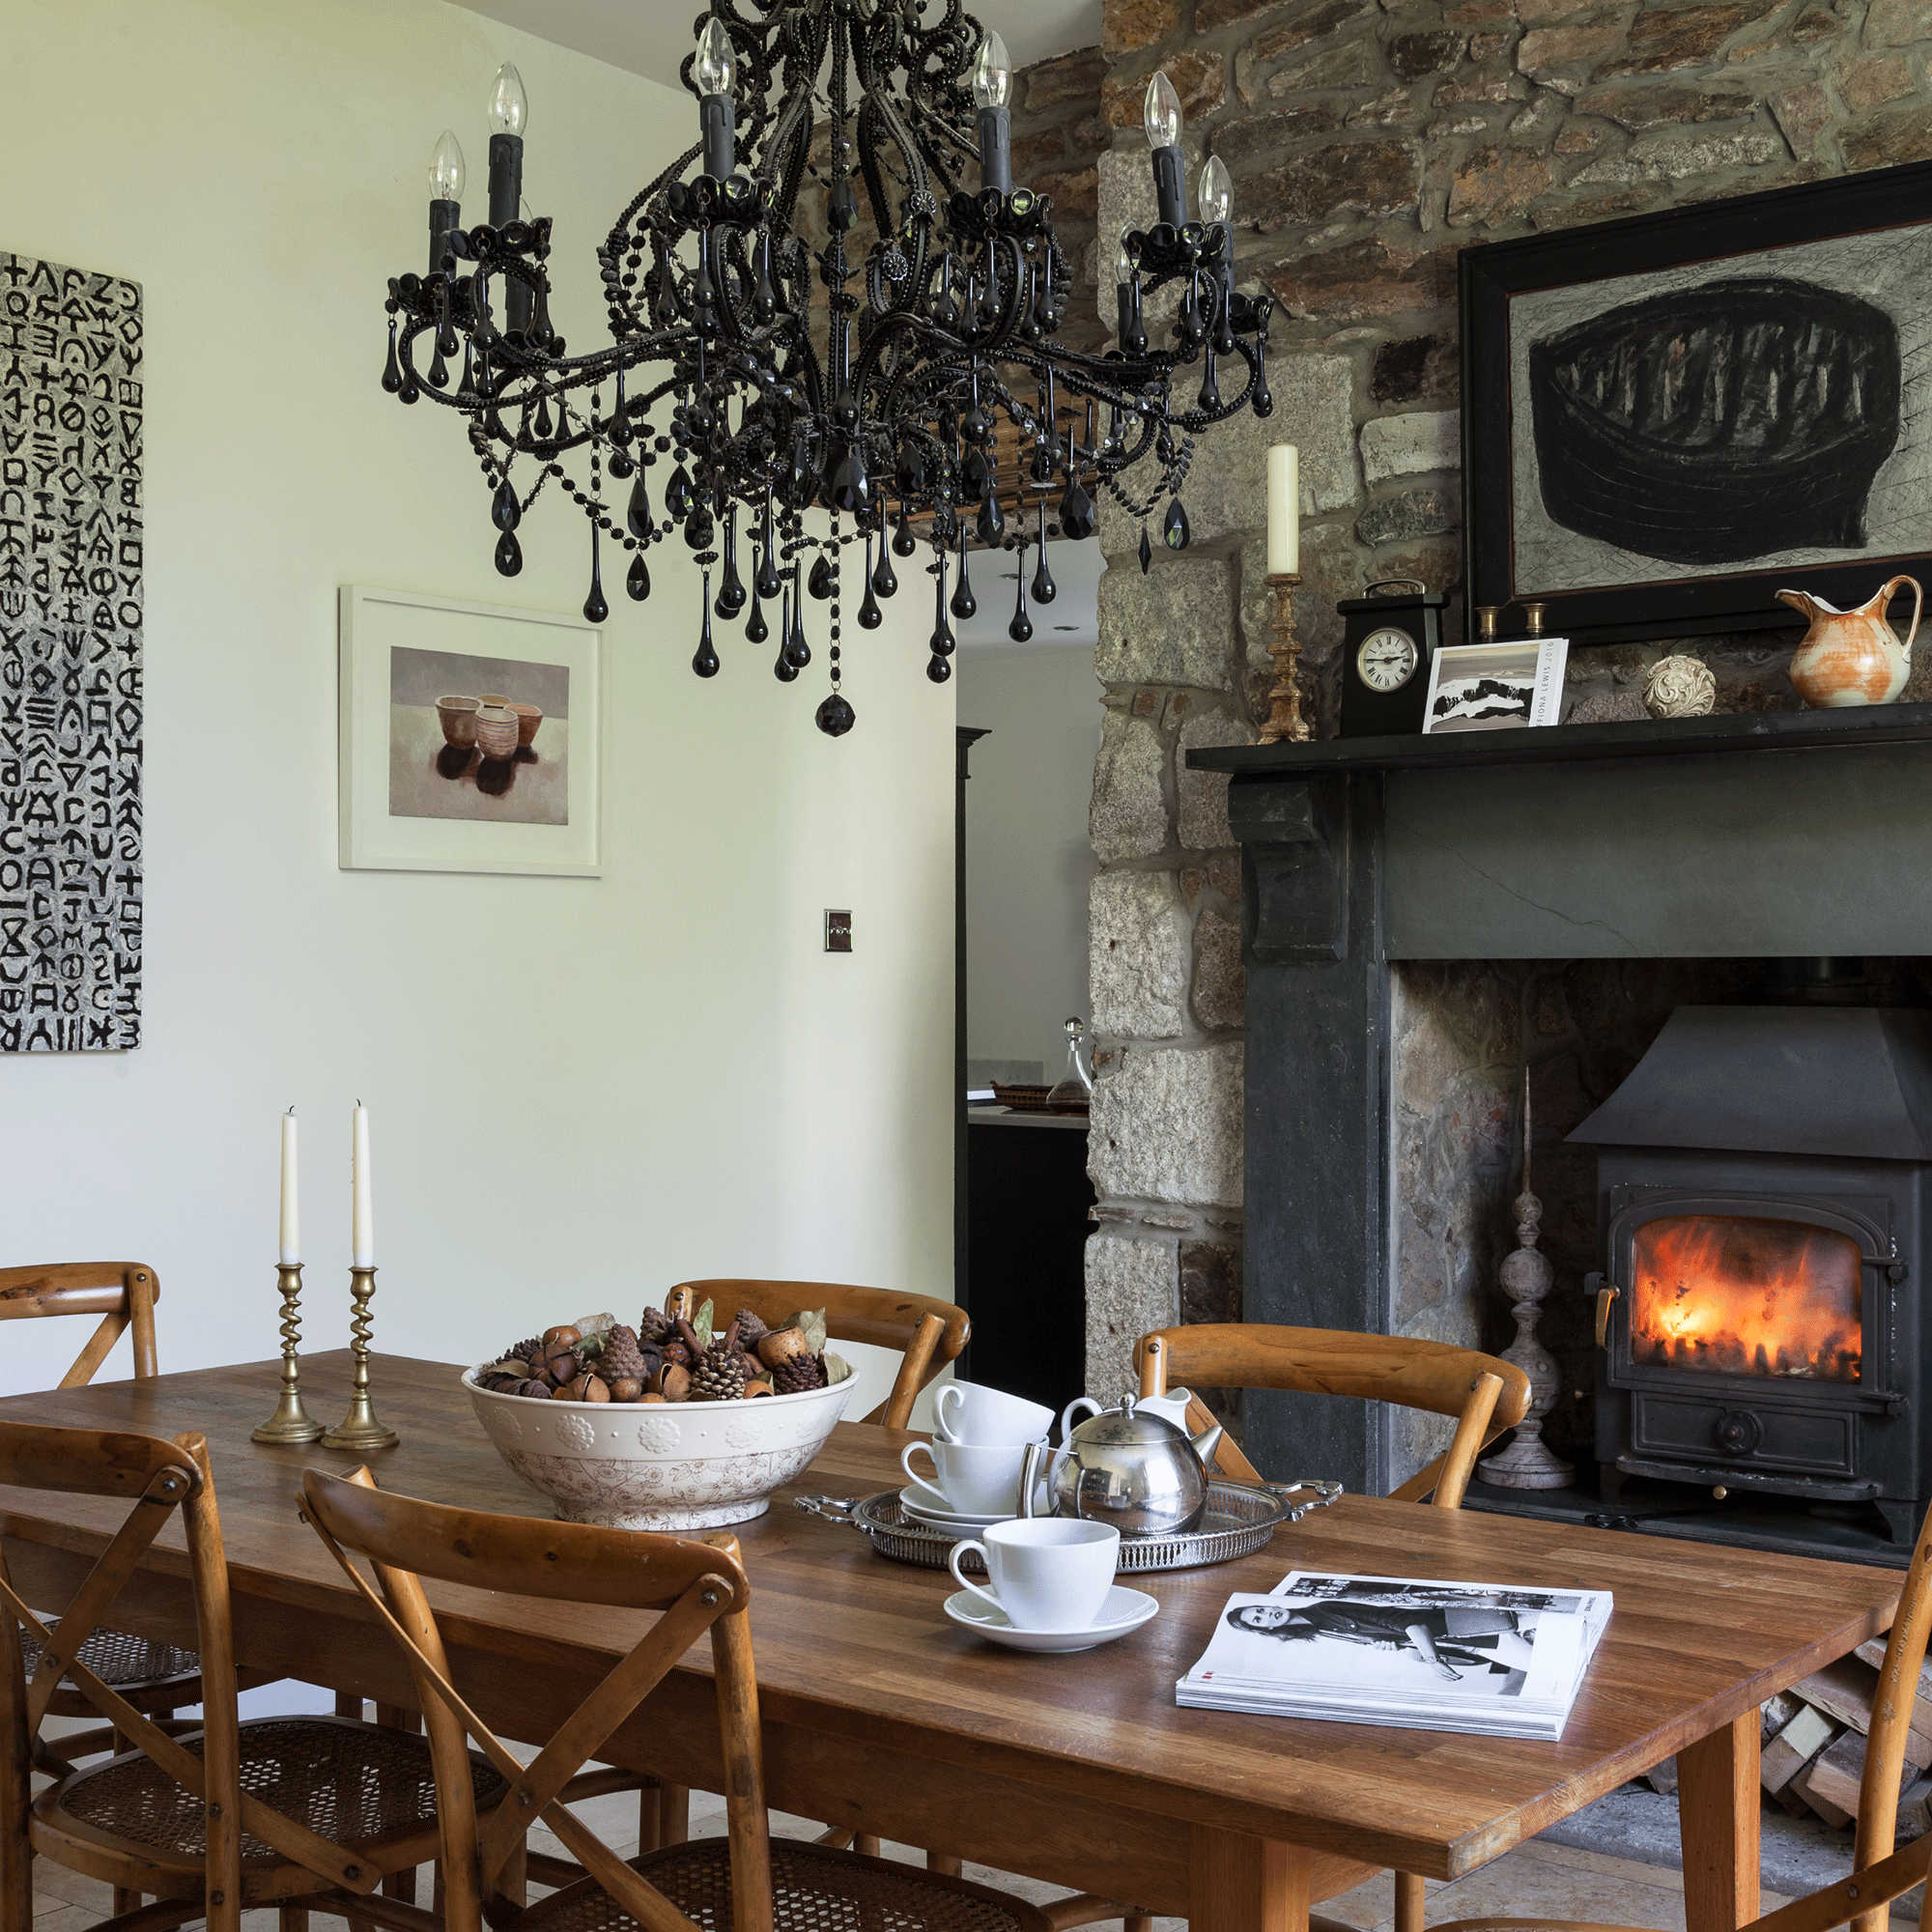 Black chandelier with wooden table